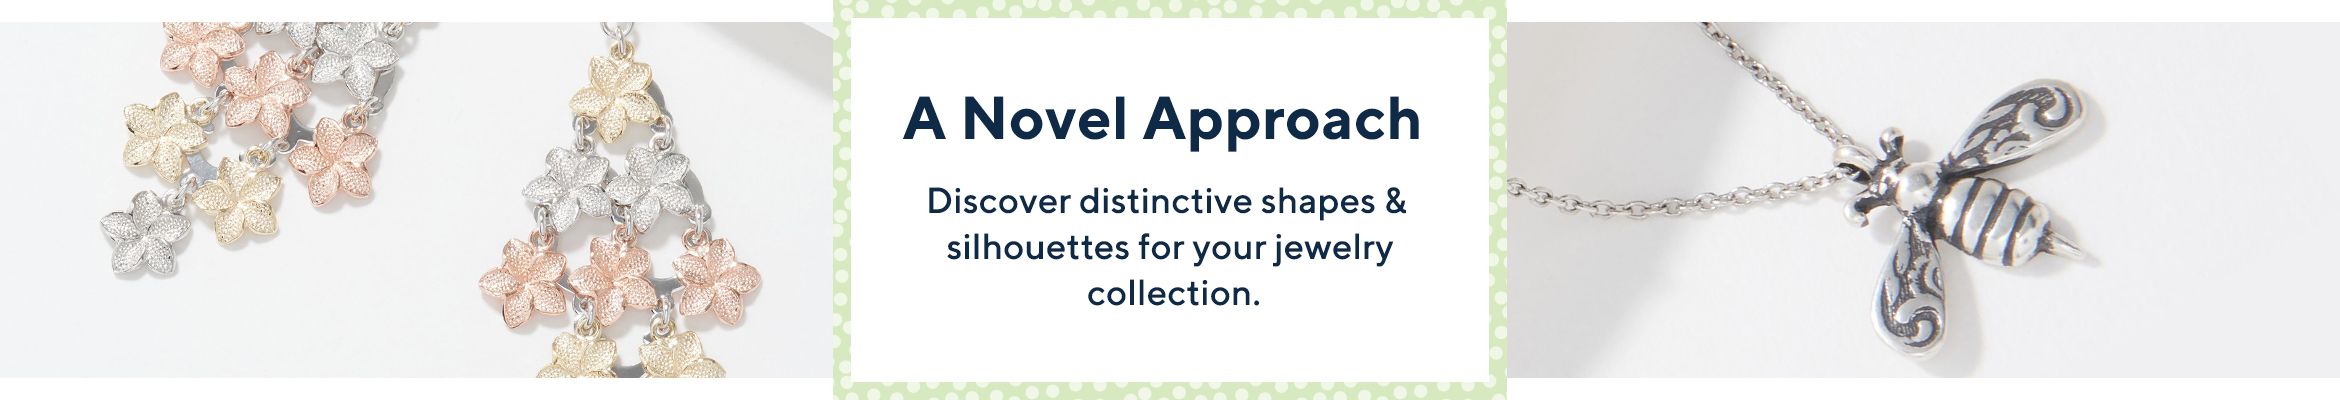 A Novel Approach - Discover distinctive shapes & silhouettes for your jewelry collection.